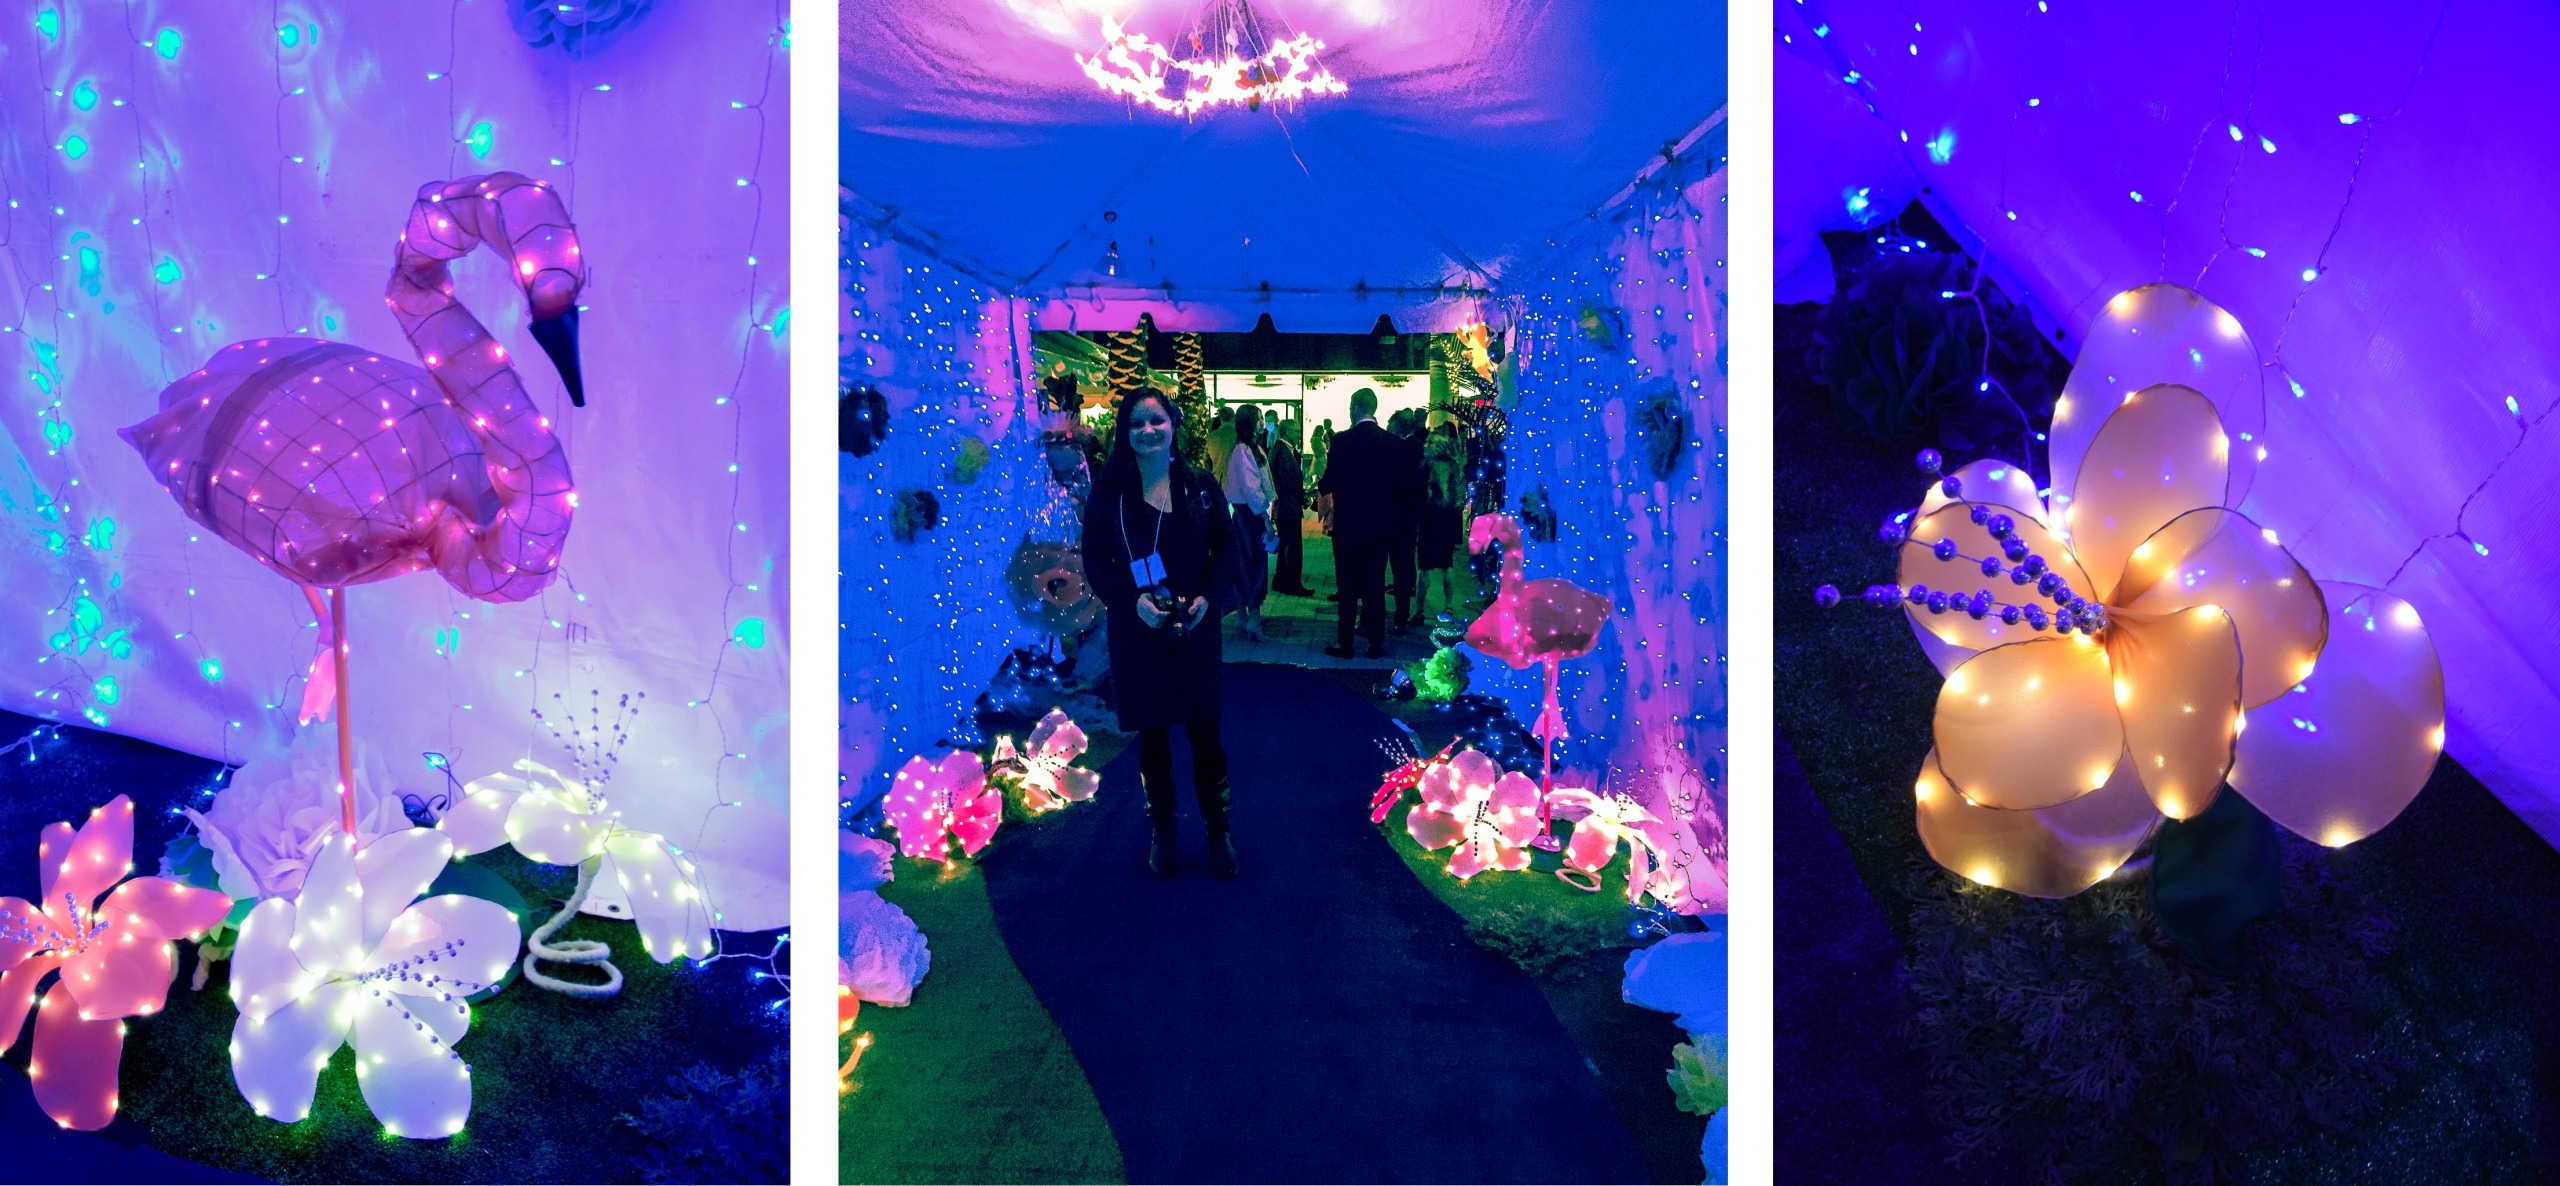 Three photos are shown of light-up flower sculptures, a light-up flamingo sculpture and the view of the tent in which these were all placed.